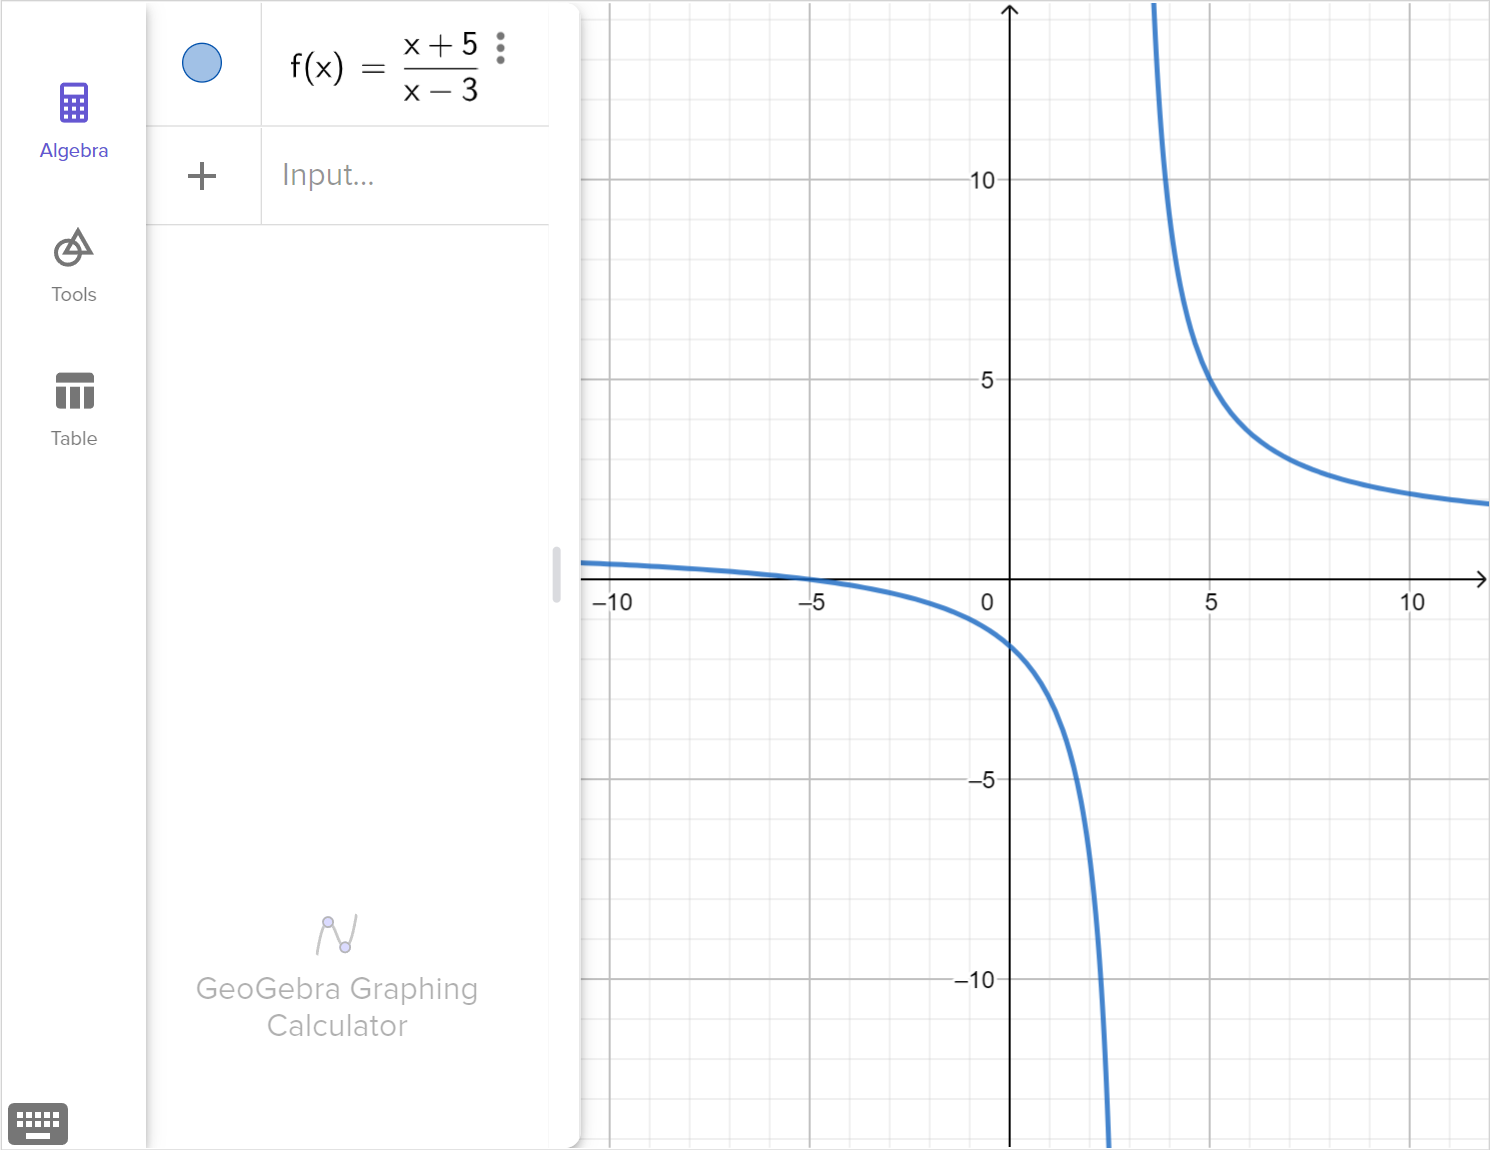 A screenshot of the GeoGebra graphing calculator showing the graph of f of x equals x plus 5 all over x minus 3. Speak to your teacher for more details.